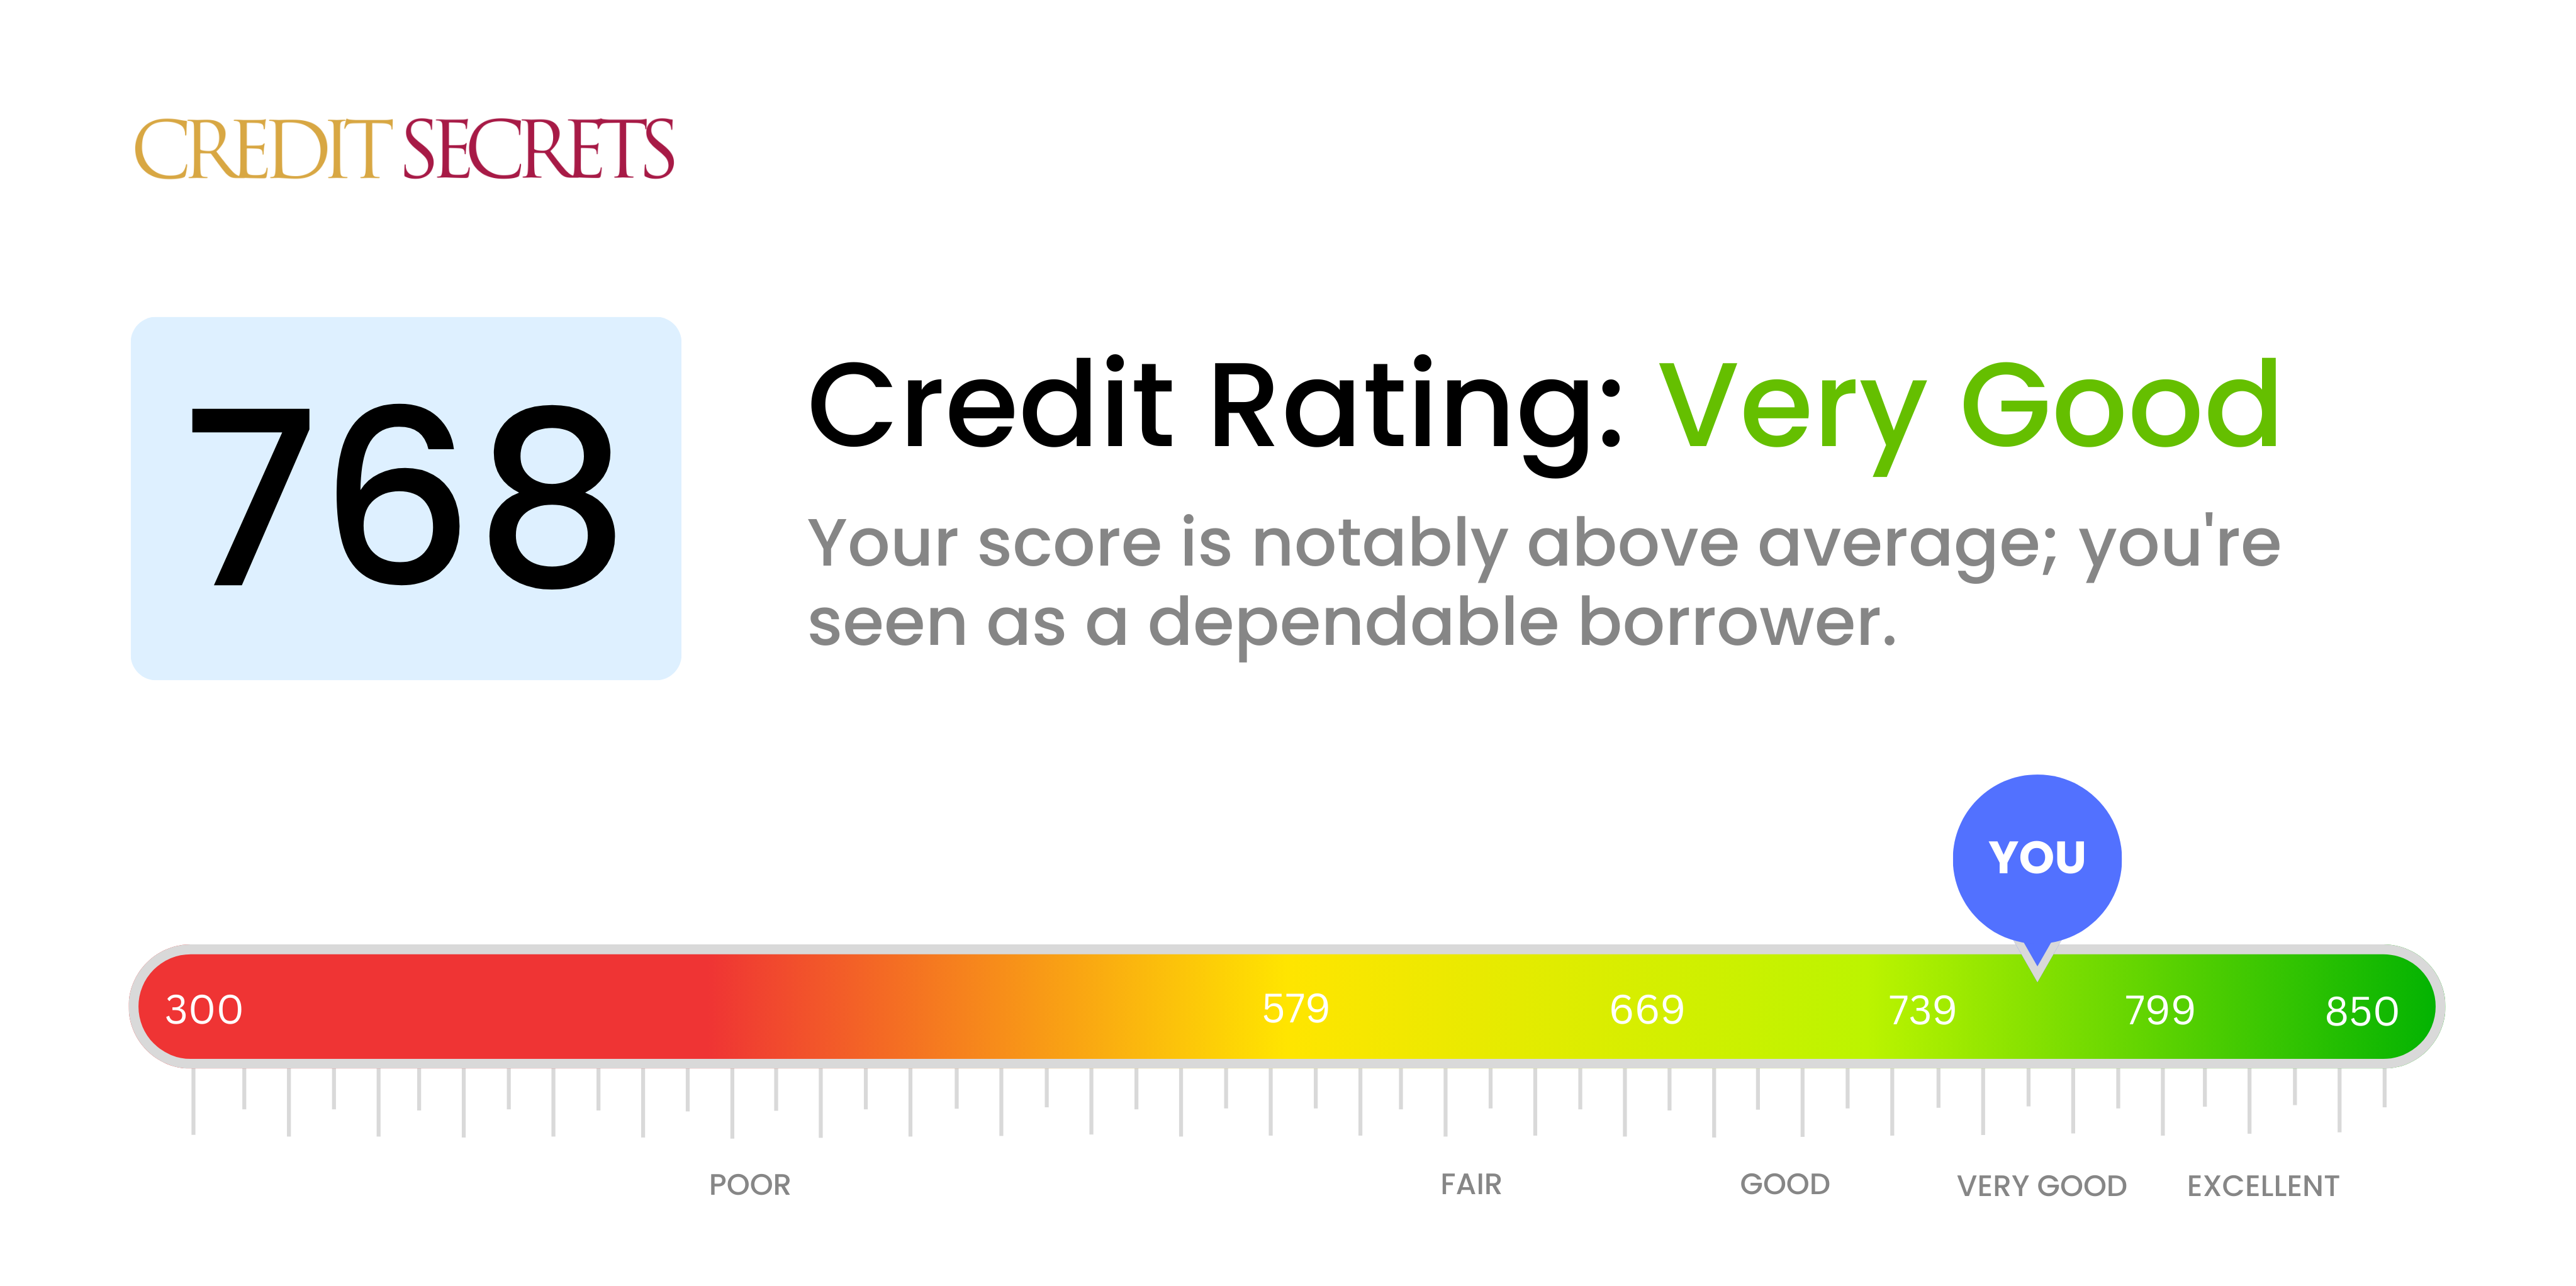 Is 768 a good credit score?